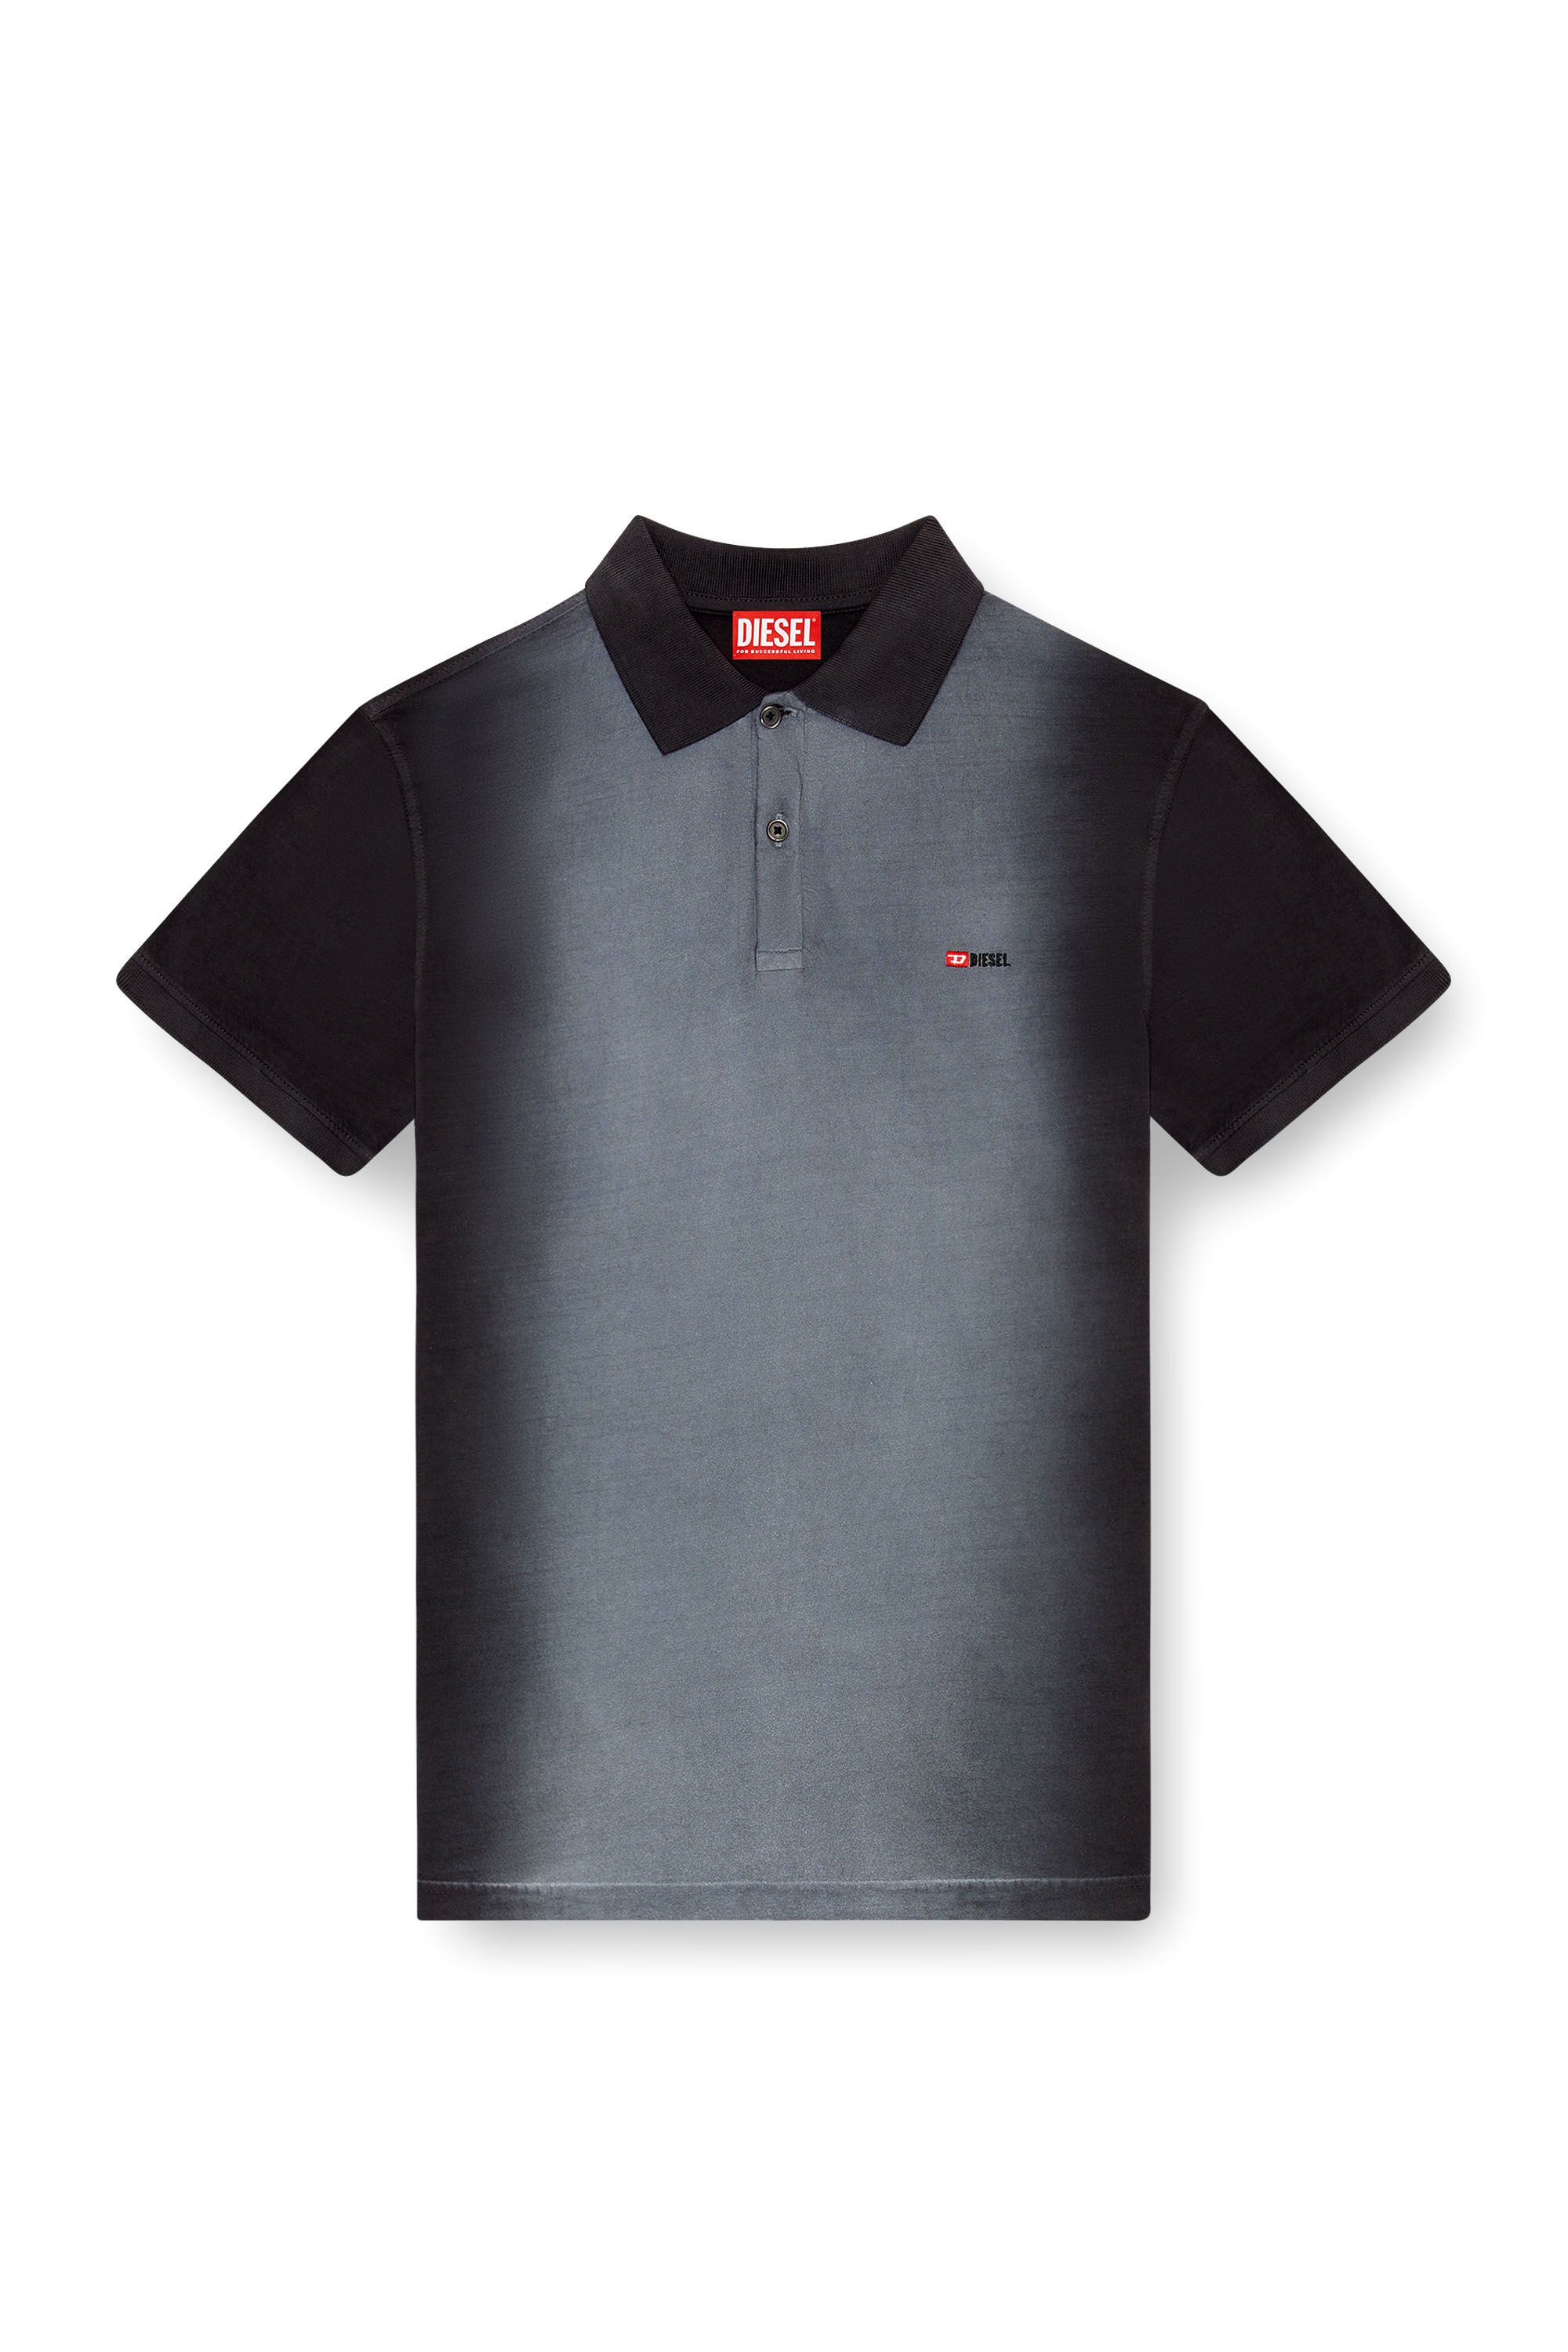 Diesel - T-REJUST-Q1, Man Polo shirt with spray treatment in Black - Image 2